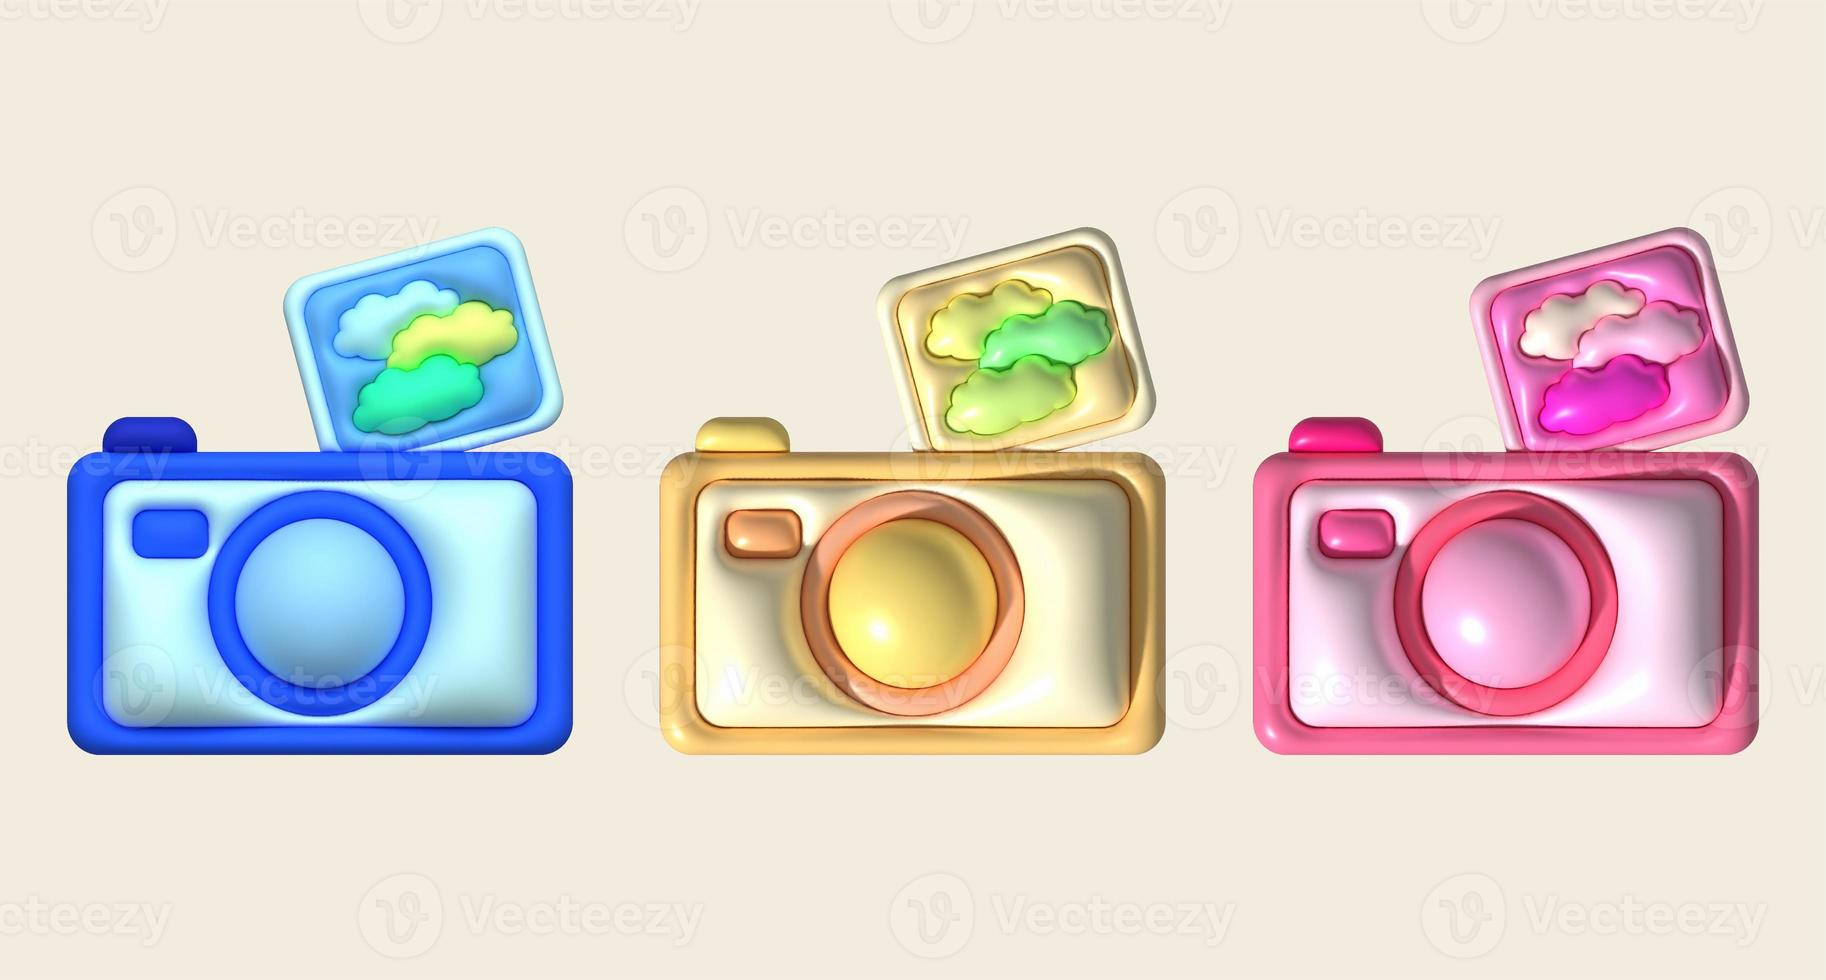 Camera and photo icons illustration 3D for design work.